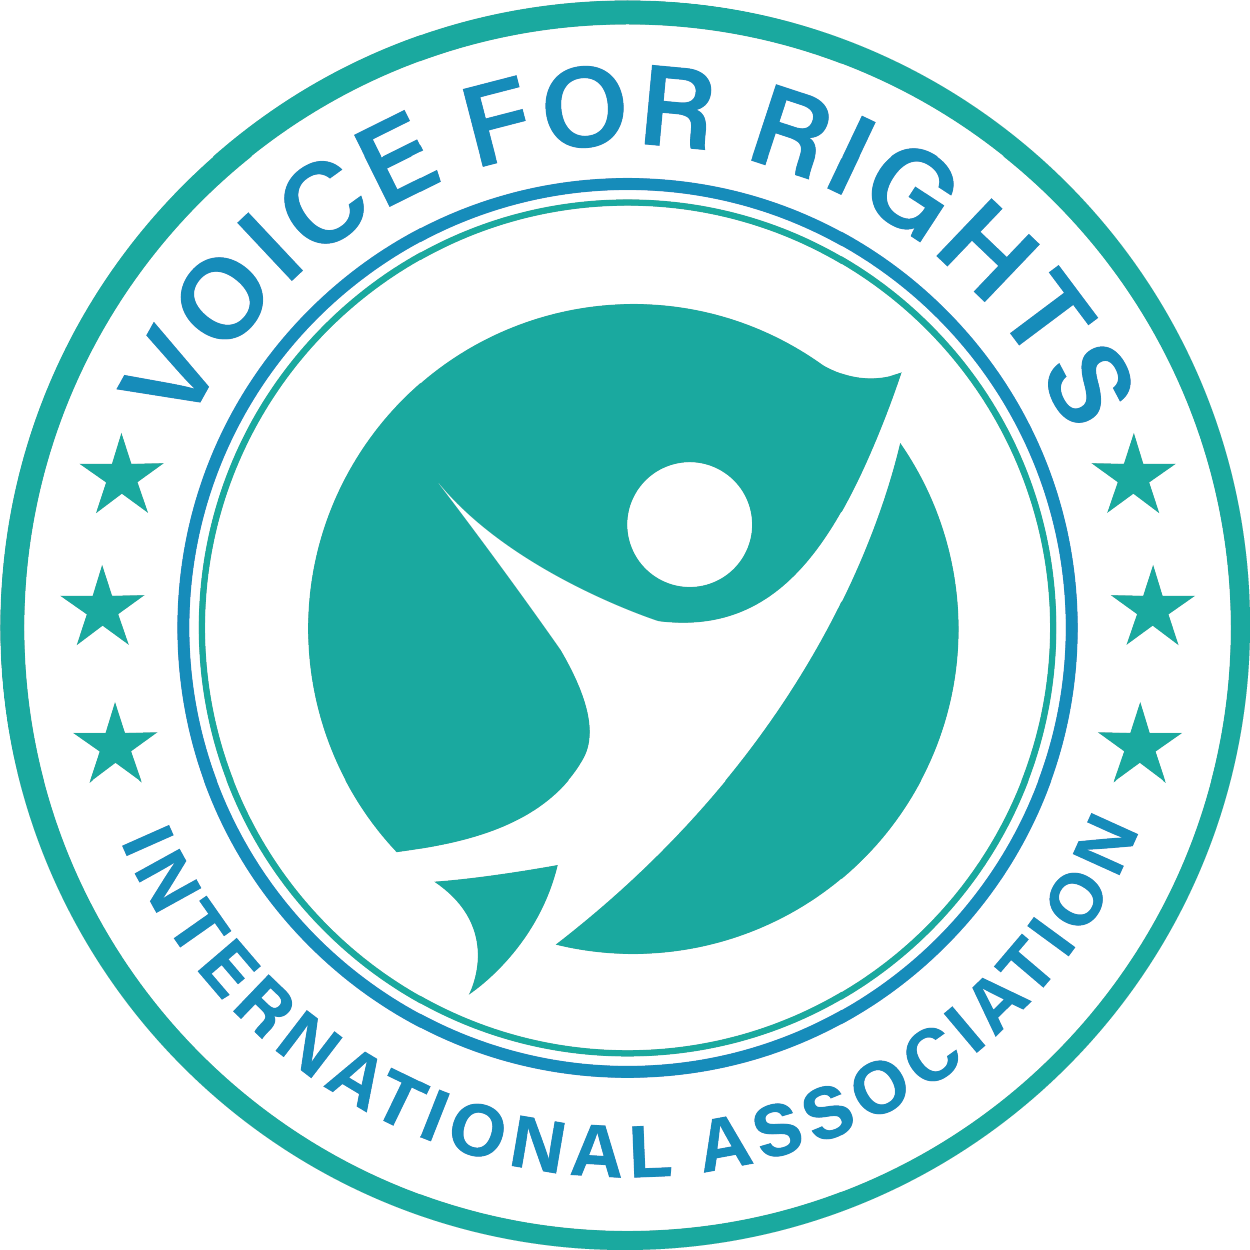 Voice for Rights International